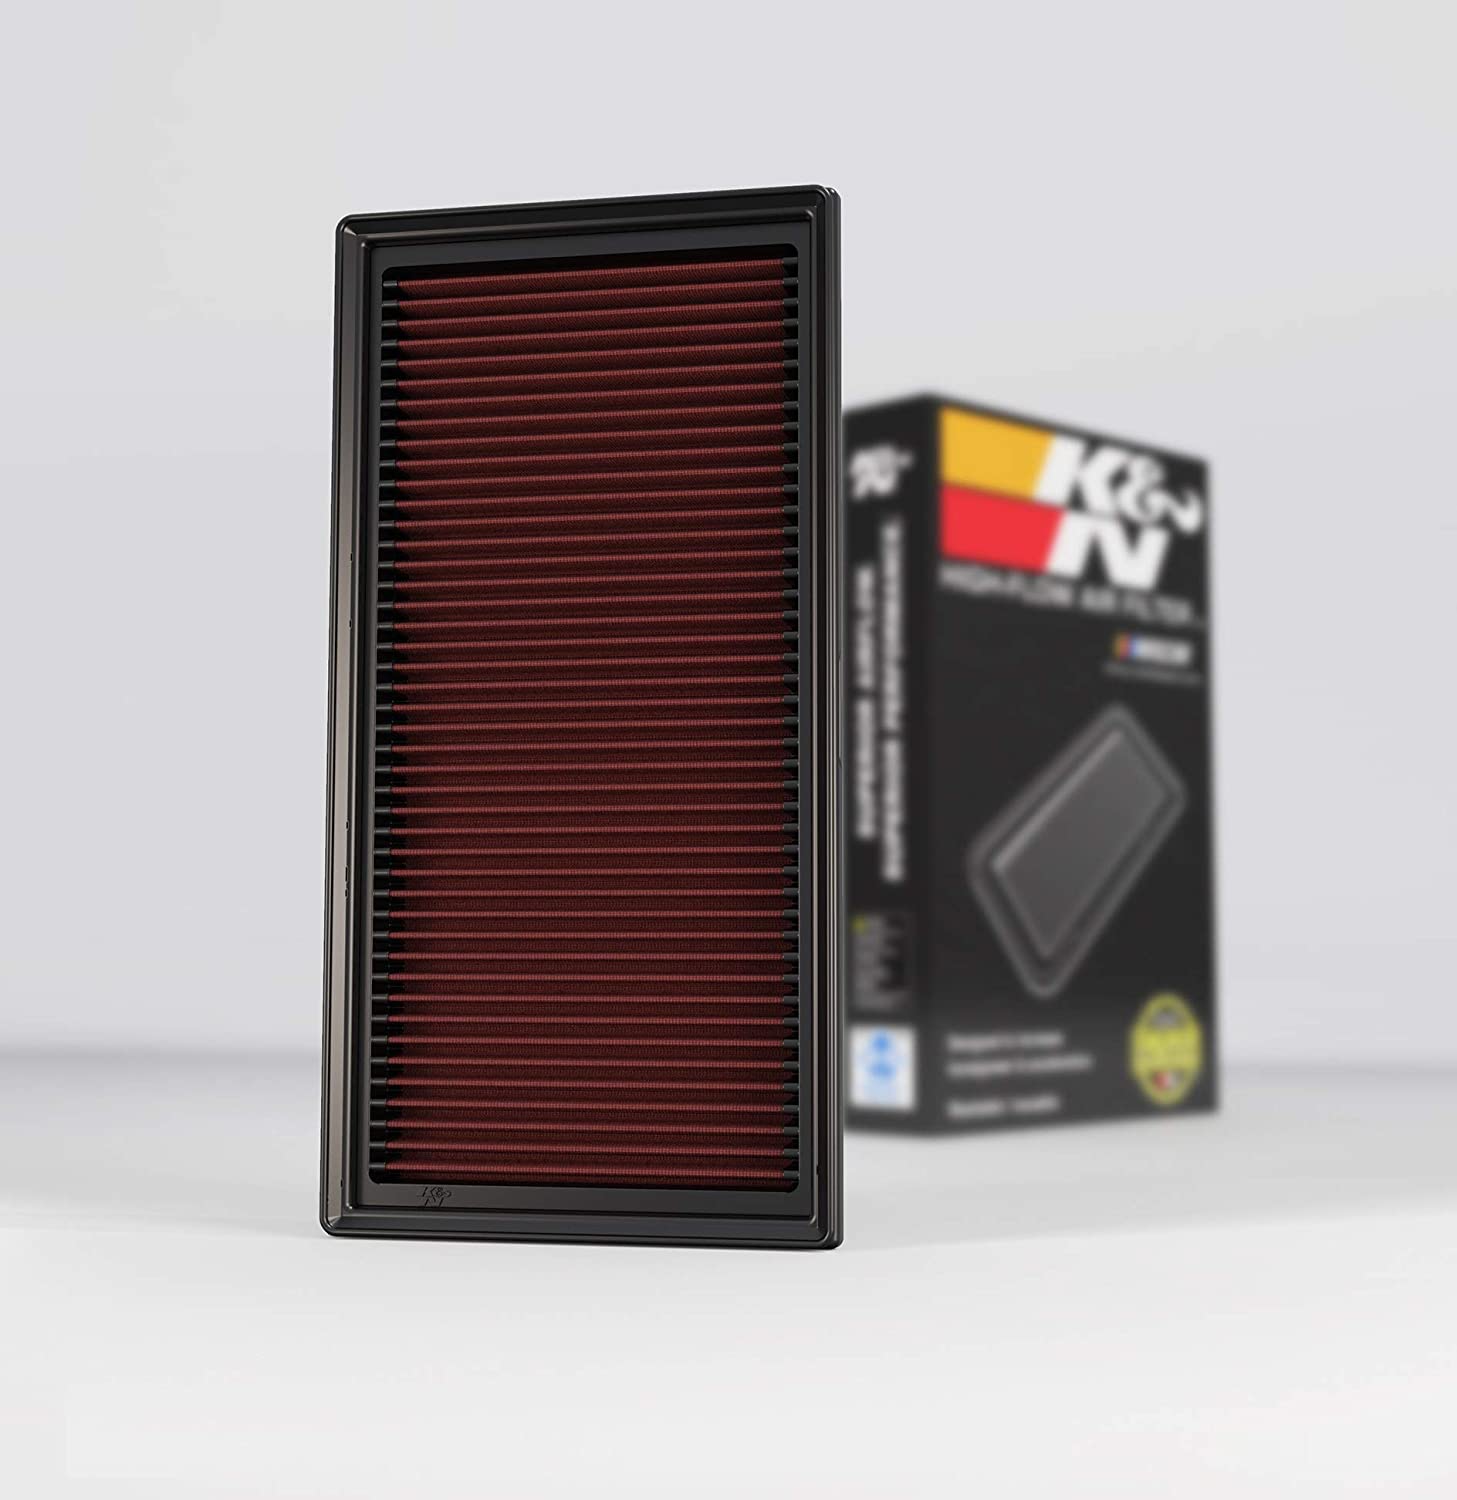 K&N Engine Air Filter: High Performance, Premium, Washable, Replacement Filter: Fits 2006-2015 Mercedes (C63 AMG, E63 AMG, CLS63 AMG, ML63 AMG, CLK63 AMG, CLS63 AMG, R63 AMG, S63 AMG), 33-2405